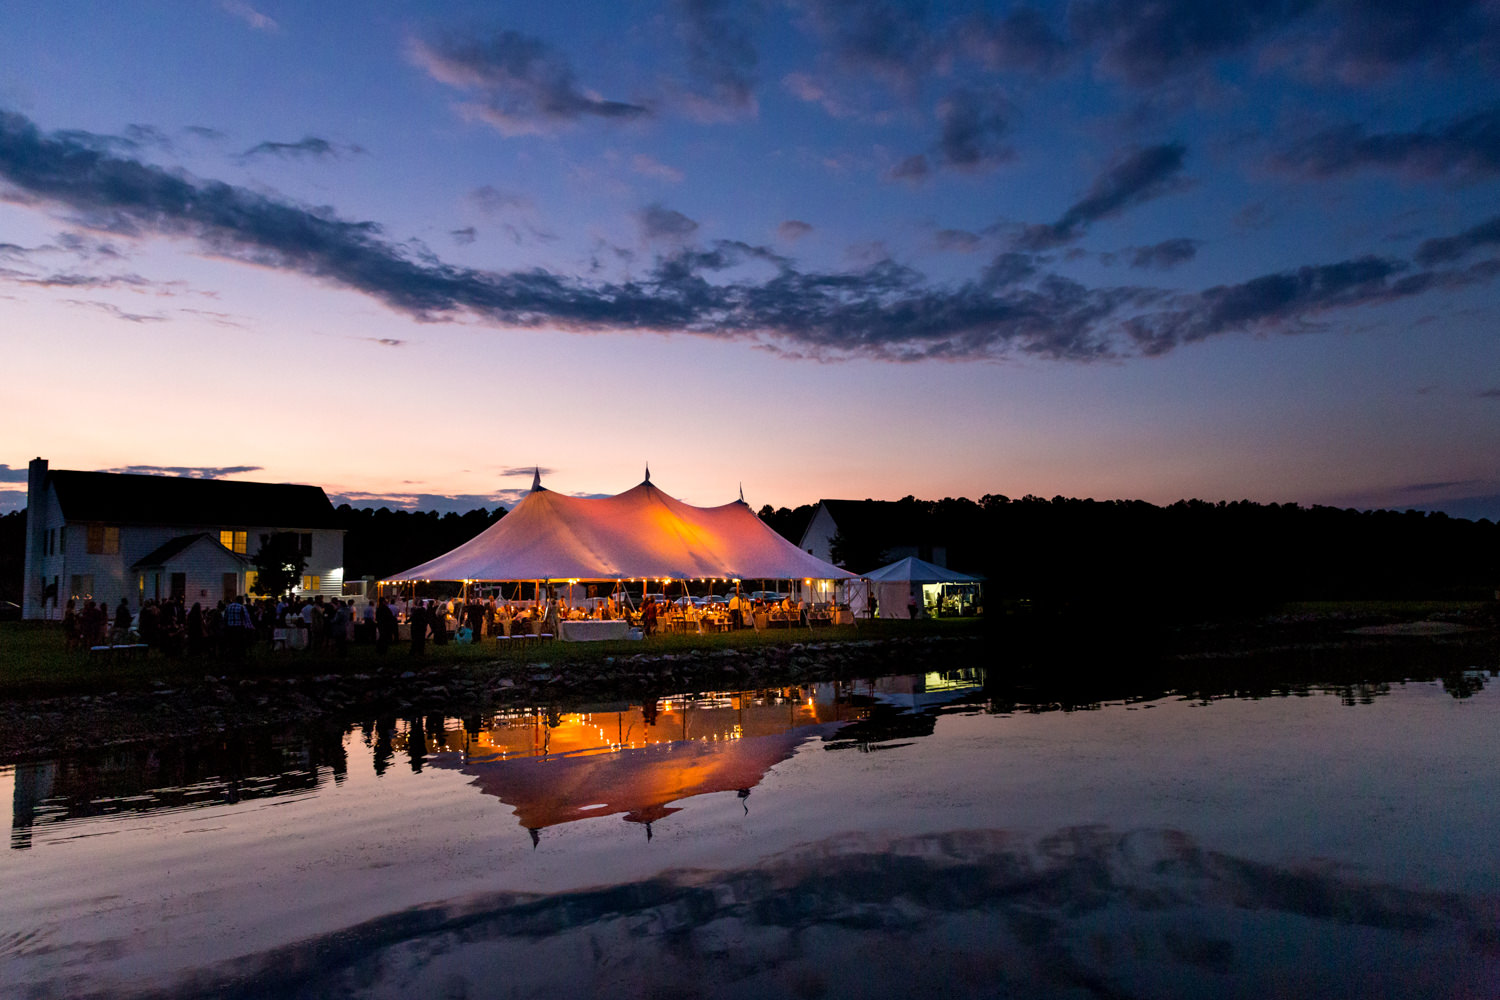 This was an Eastern Shore Maryland Wedding, Swan Cove Manor, this is a landscape shot of just the reception tent on the water, you can see the glowing tent, the blue and orange sky and the reflection of the tent in the water, Procopio Photography, best top Washington DC photographer, best top Maryland photographer, best top Virginia photographer, best top DMV photographer, best top wedding photographer, best top commercial photographer, best top portrait photographer, best top boudoir photographer, modern fine art portraits, dramatic, unique, different, bold, editorial, photojournalism, award winning photographer, published photographer, memorable images, be different, stand out